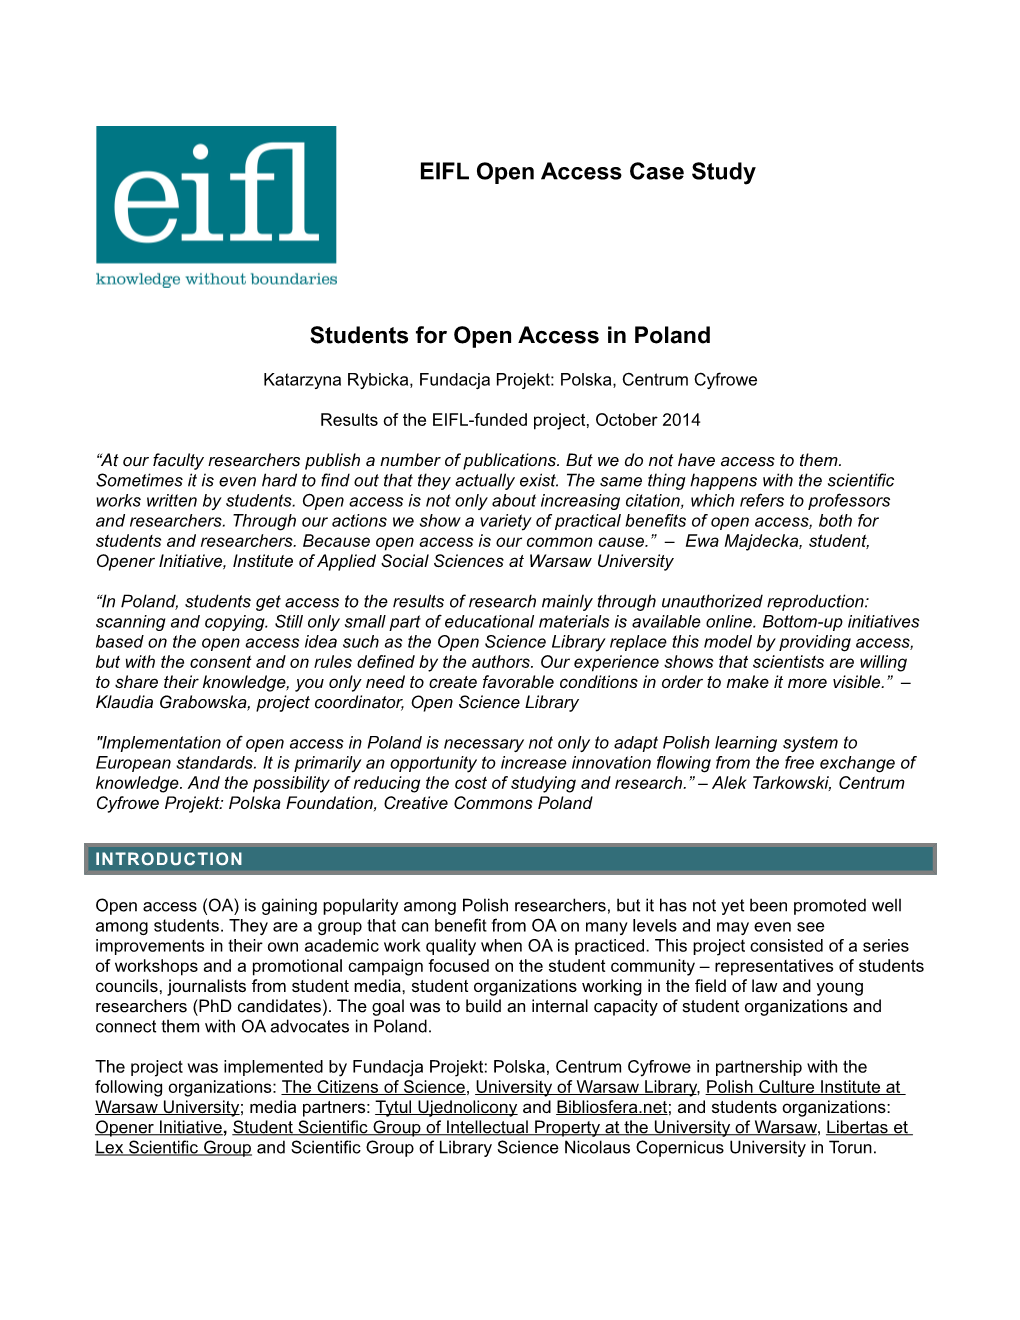 EIFL Open Access Case Study Students for Open Access in Poland